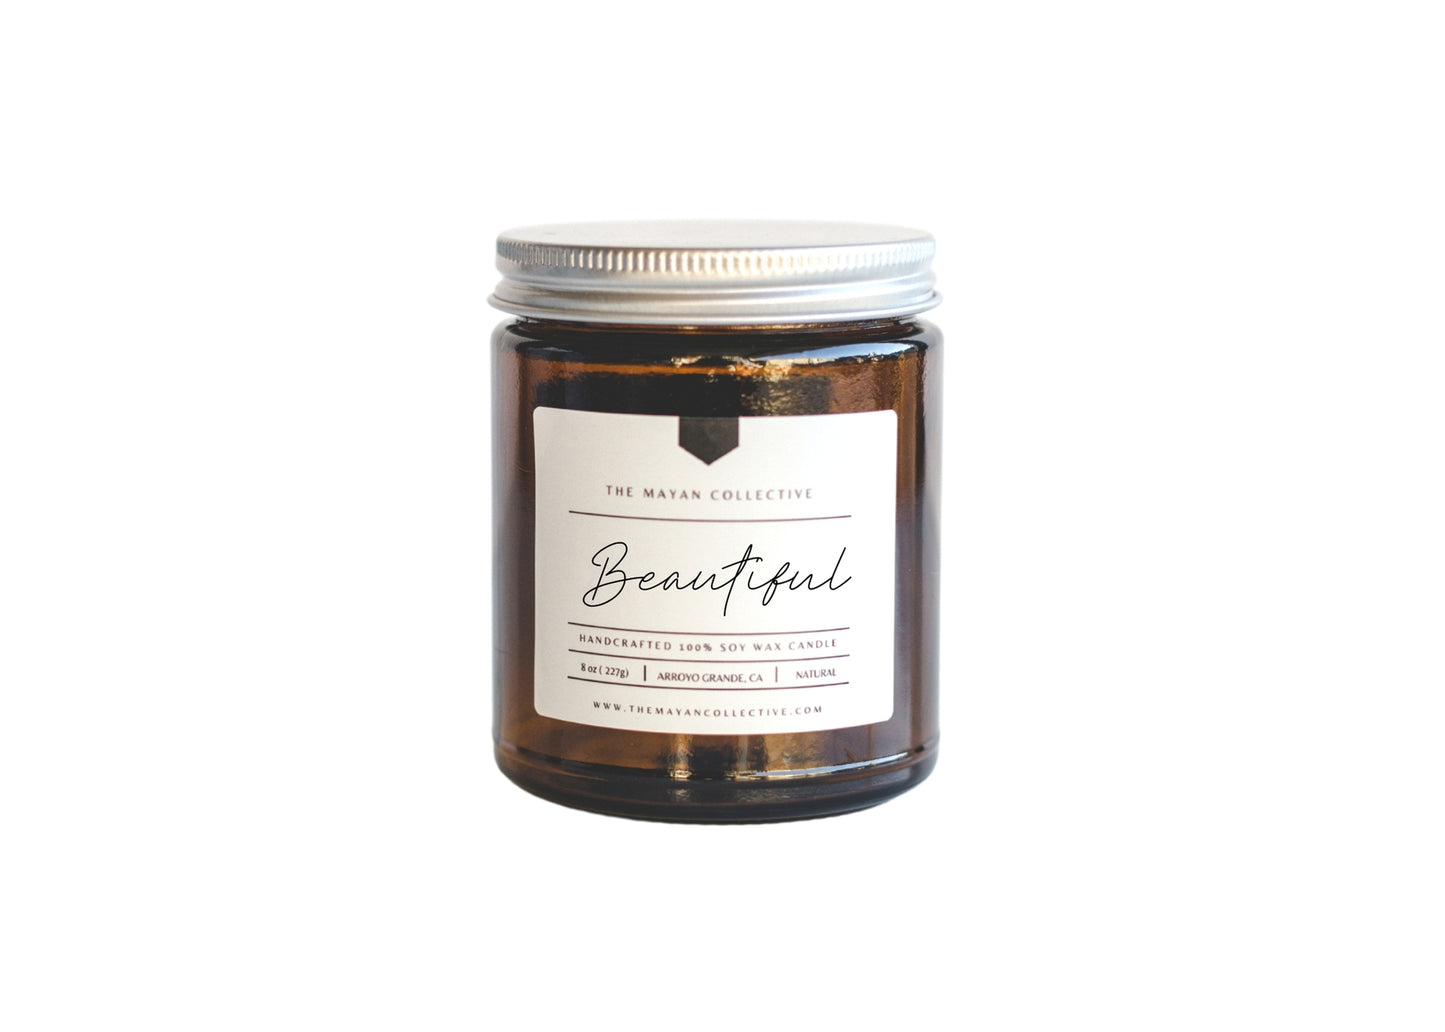 Pear Pomegranate Soy Wax Candle "Beautiful"